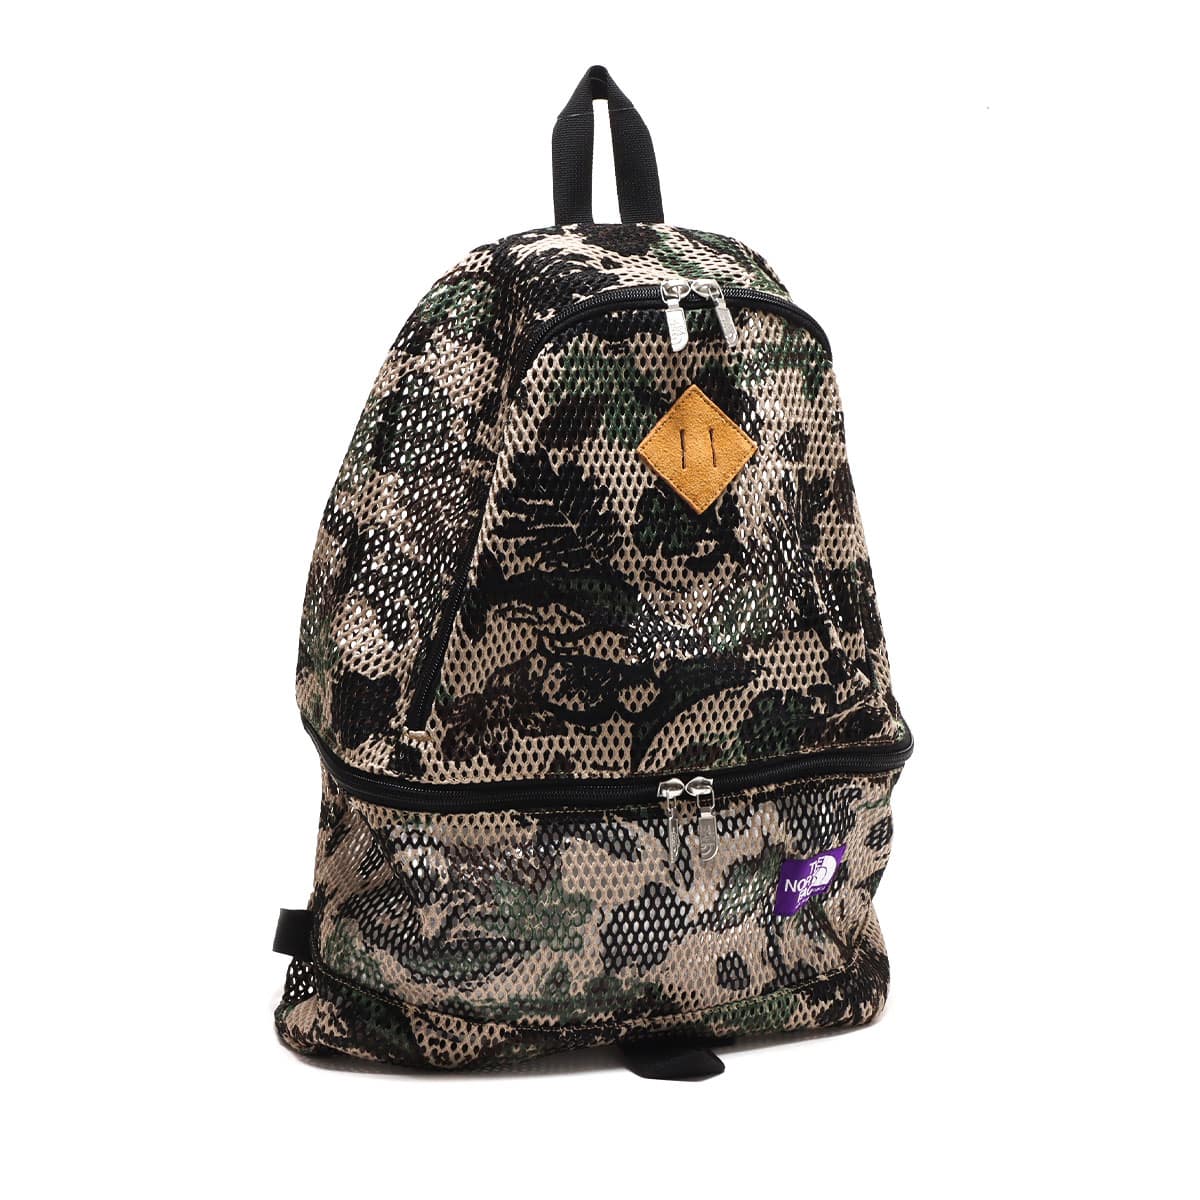 THE NORTH FACE PURPLE LABEL Botanical Print Mesh Day Pack BEIGE 22SS-I